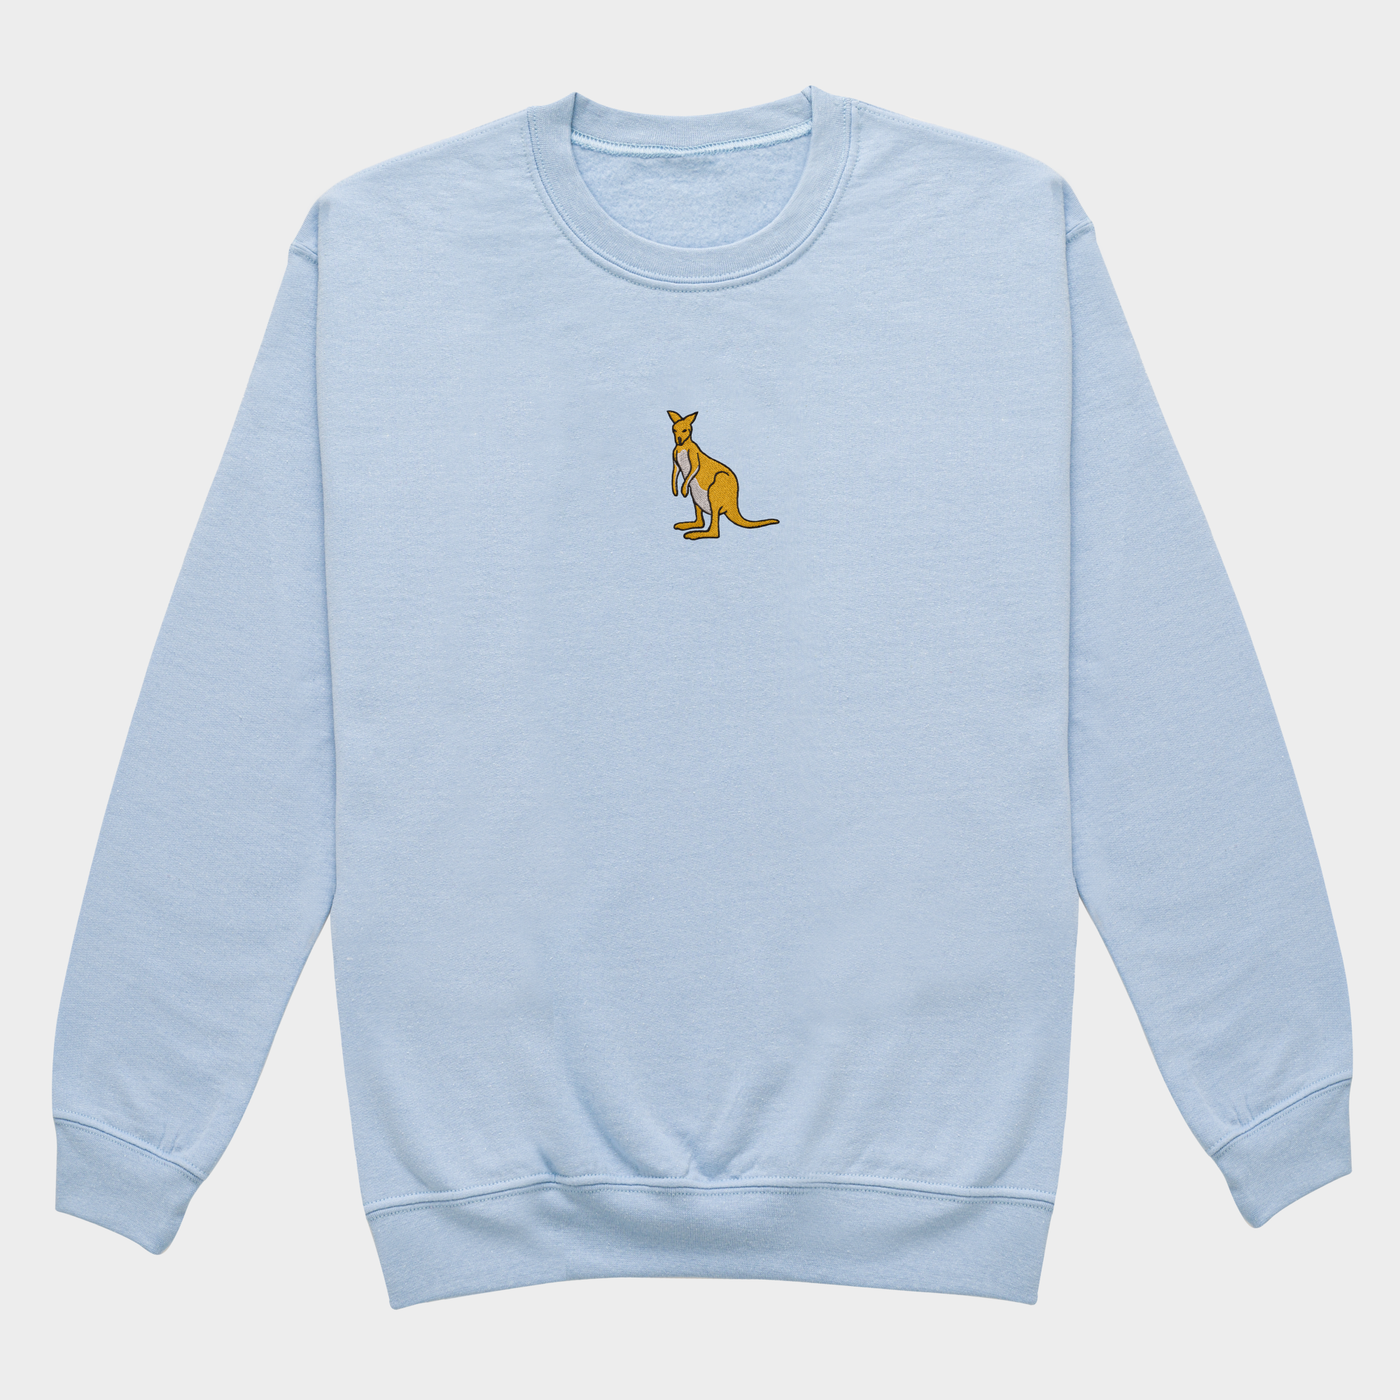 Bobby's Planet Women's Embroidered Kangaroo Sweatshirt from Australia Down Under Animals Collection in Light Blue Color#color_light-blue